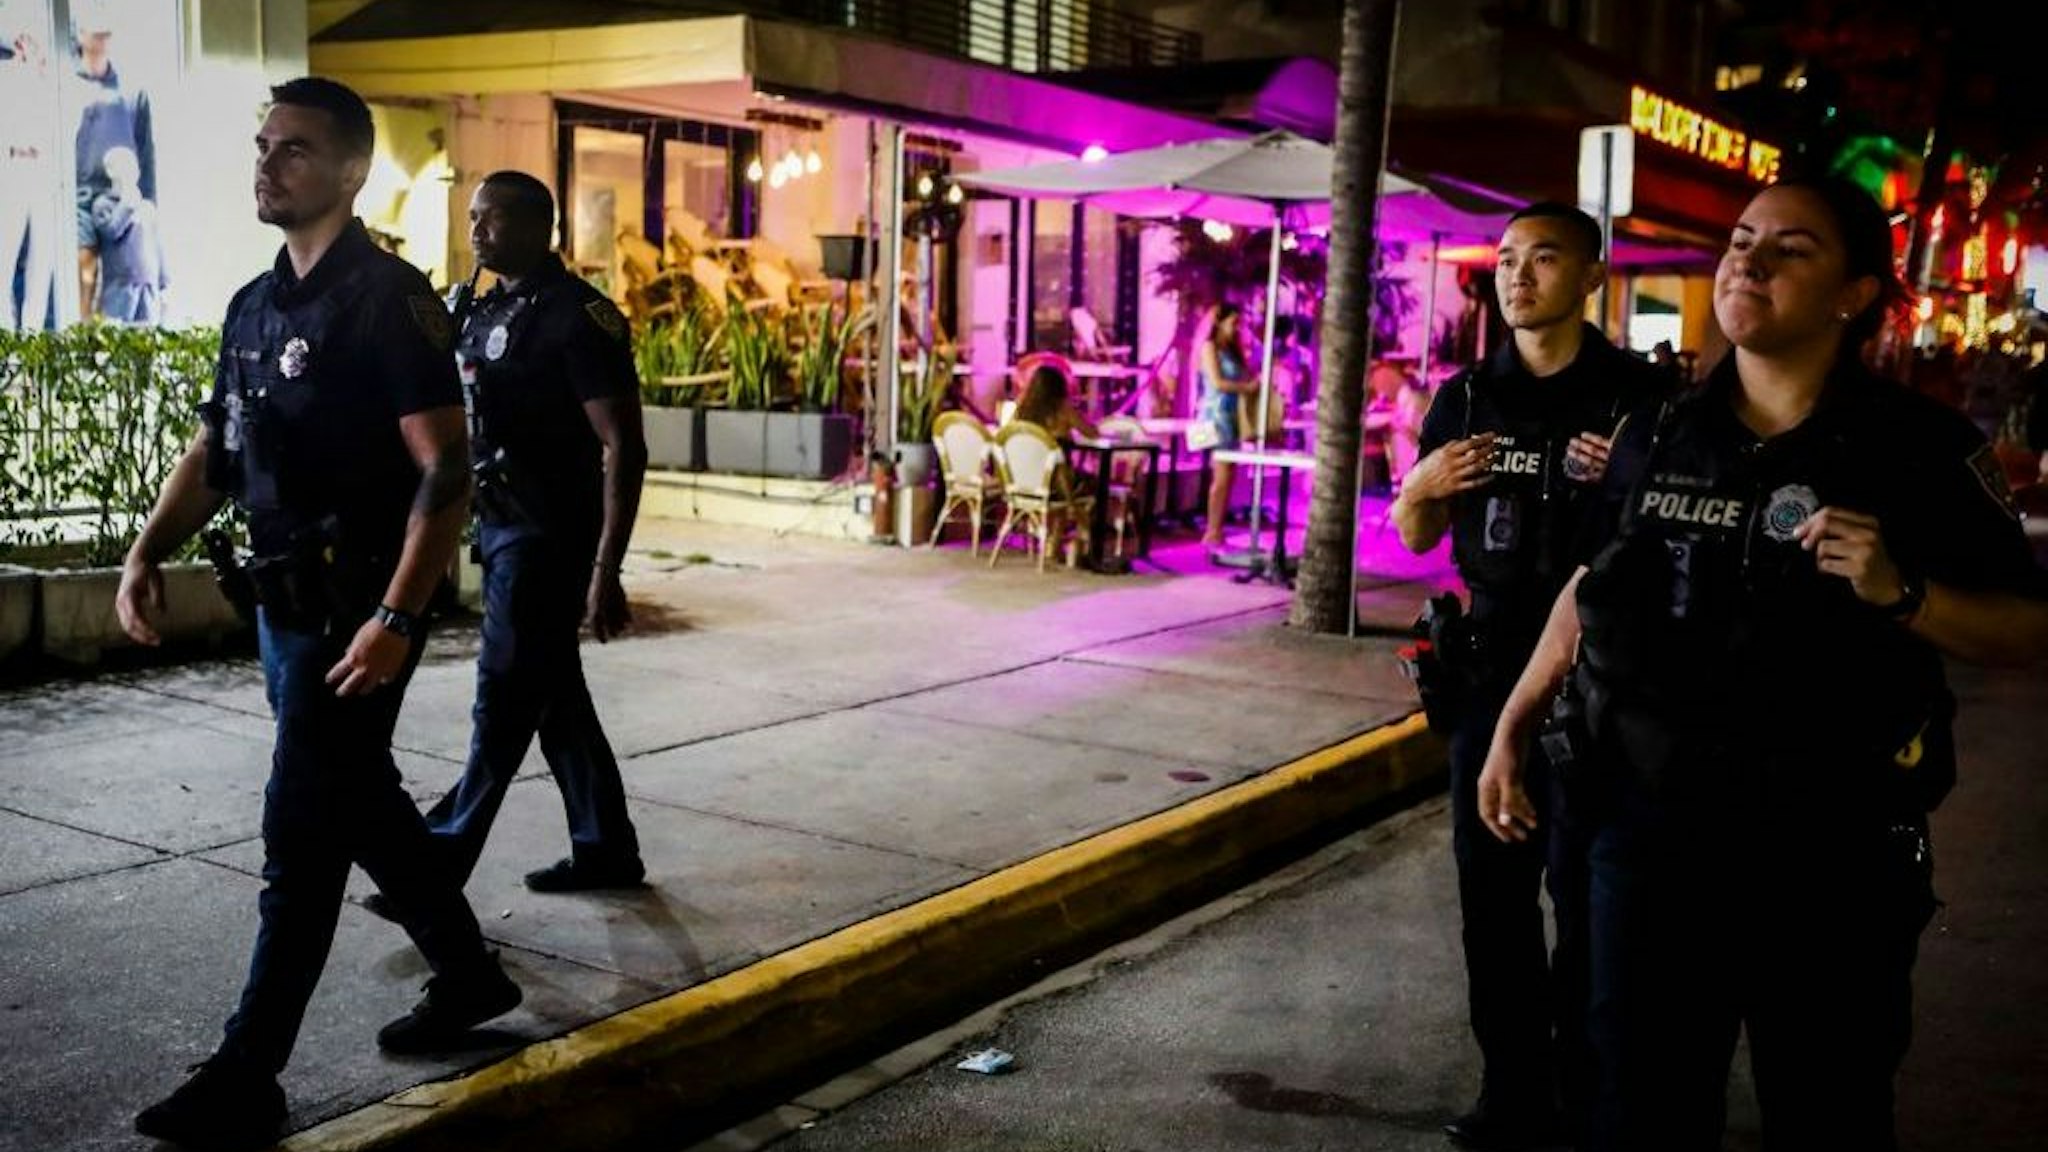 Miami Beach Police patrol Ocean Drive before a curfew goes into effect during Spring Break in Miami Beach, Florida, on March 24, 2022. - The US city of Miami Beach has declared a state of emergency and will impose a curfew this weekend to stem a wave of violence linked to the influx of revellers to Florida for spring break. (Photo by Eva Marie UZCATEGUI / AFP) (Photo by EVA MARIE UZCATEGUI/AFP via Getty Images)